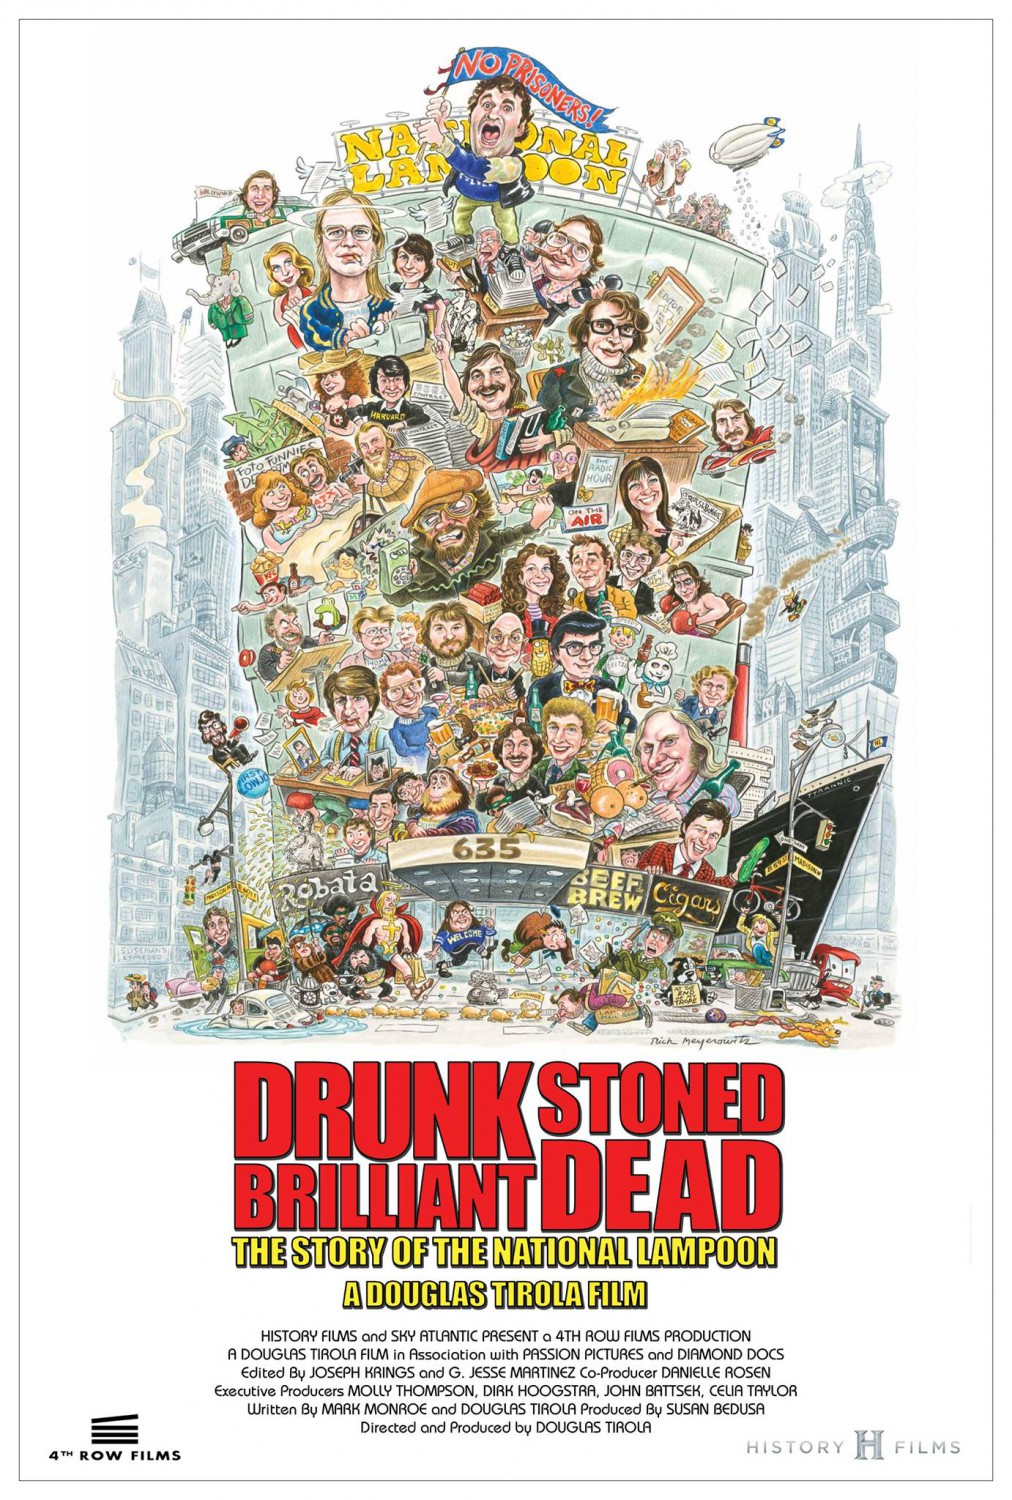 Extra Large Movie Poster Image for Drunk Stoned Brilliant Dead: The Story of the National Lampoon 